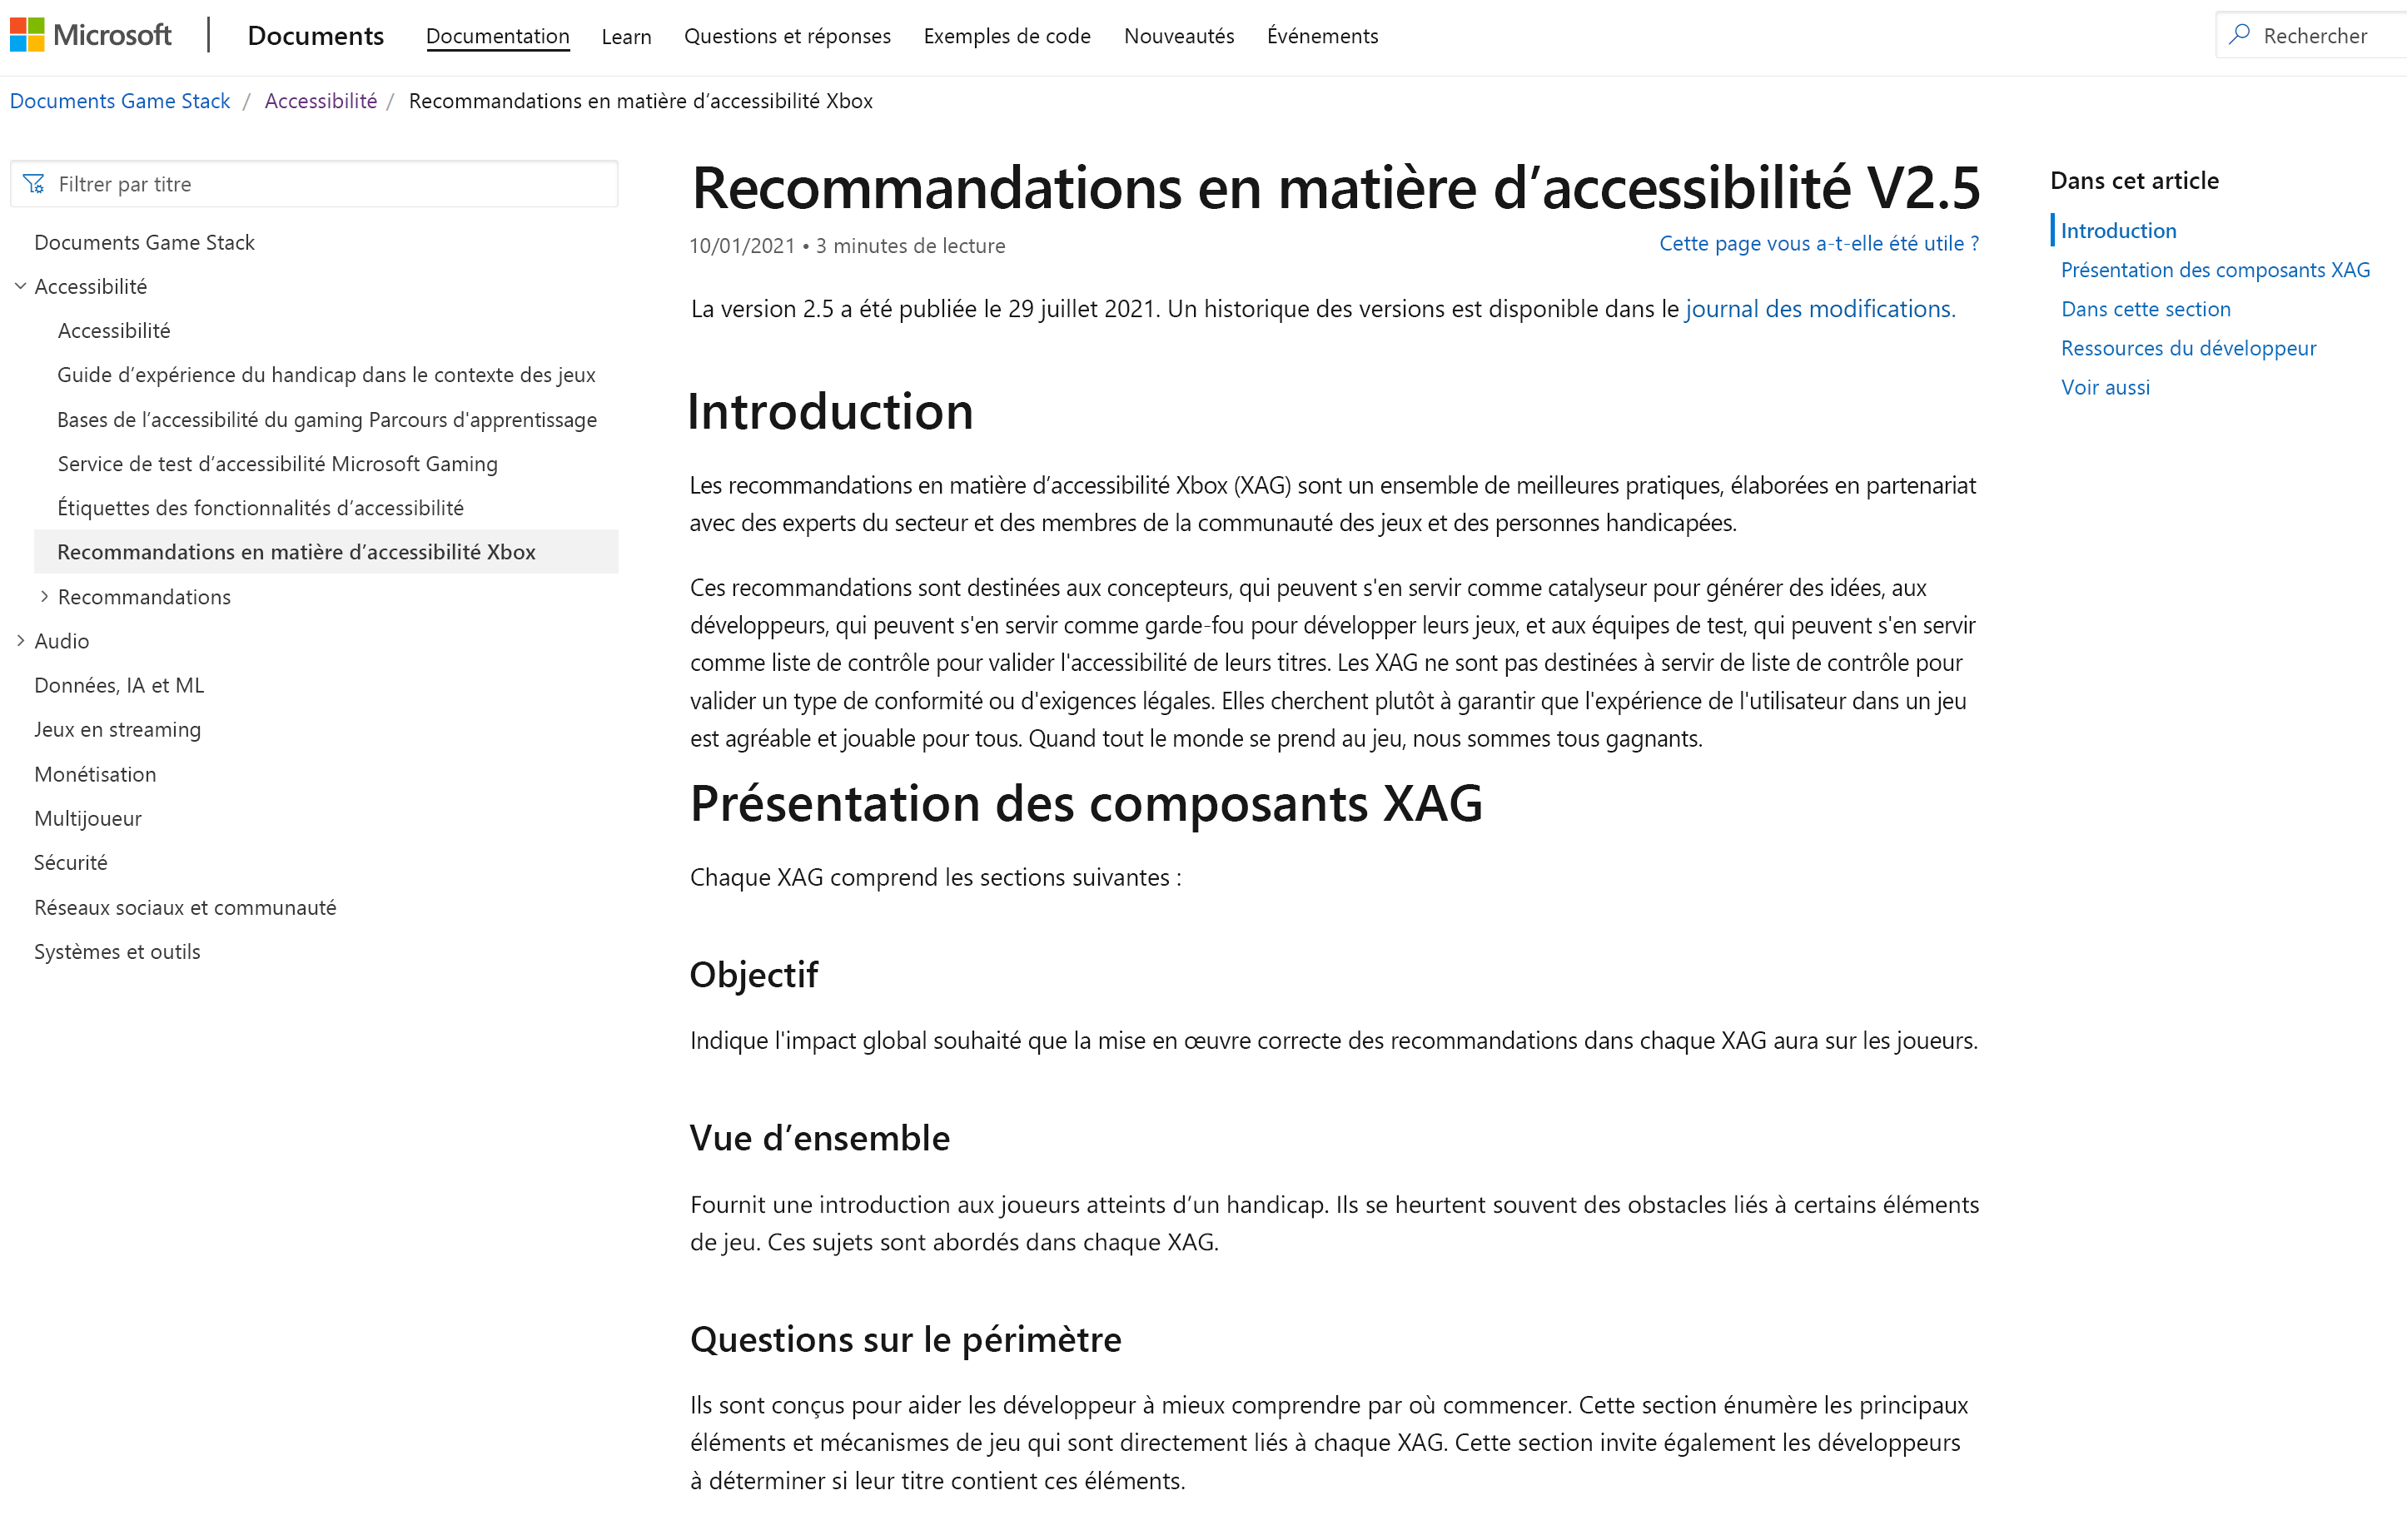 Screenshot that shows the Xbox Accessibility Guidelines V2.5 website shown in Microsoft Edge.